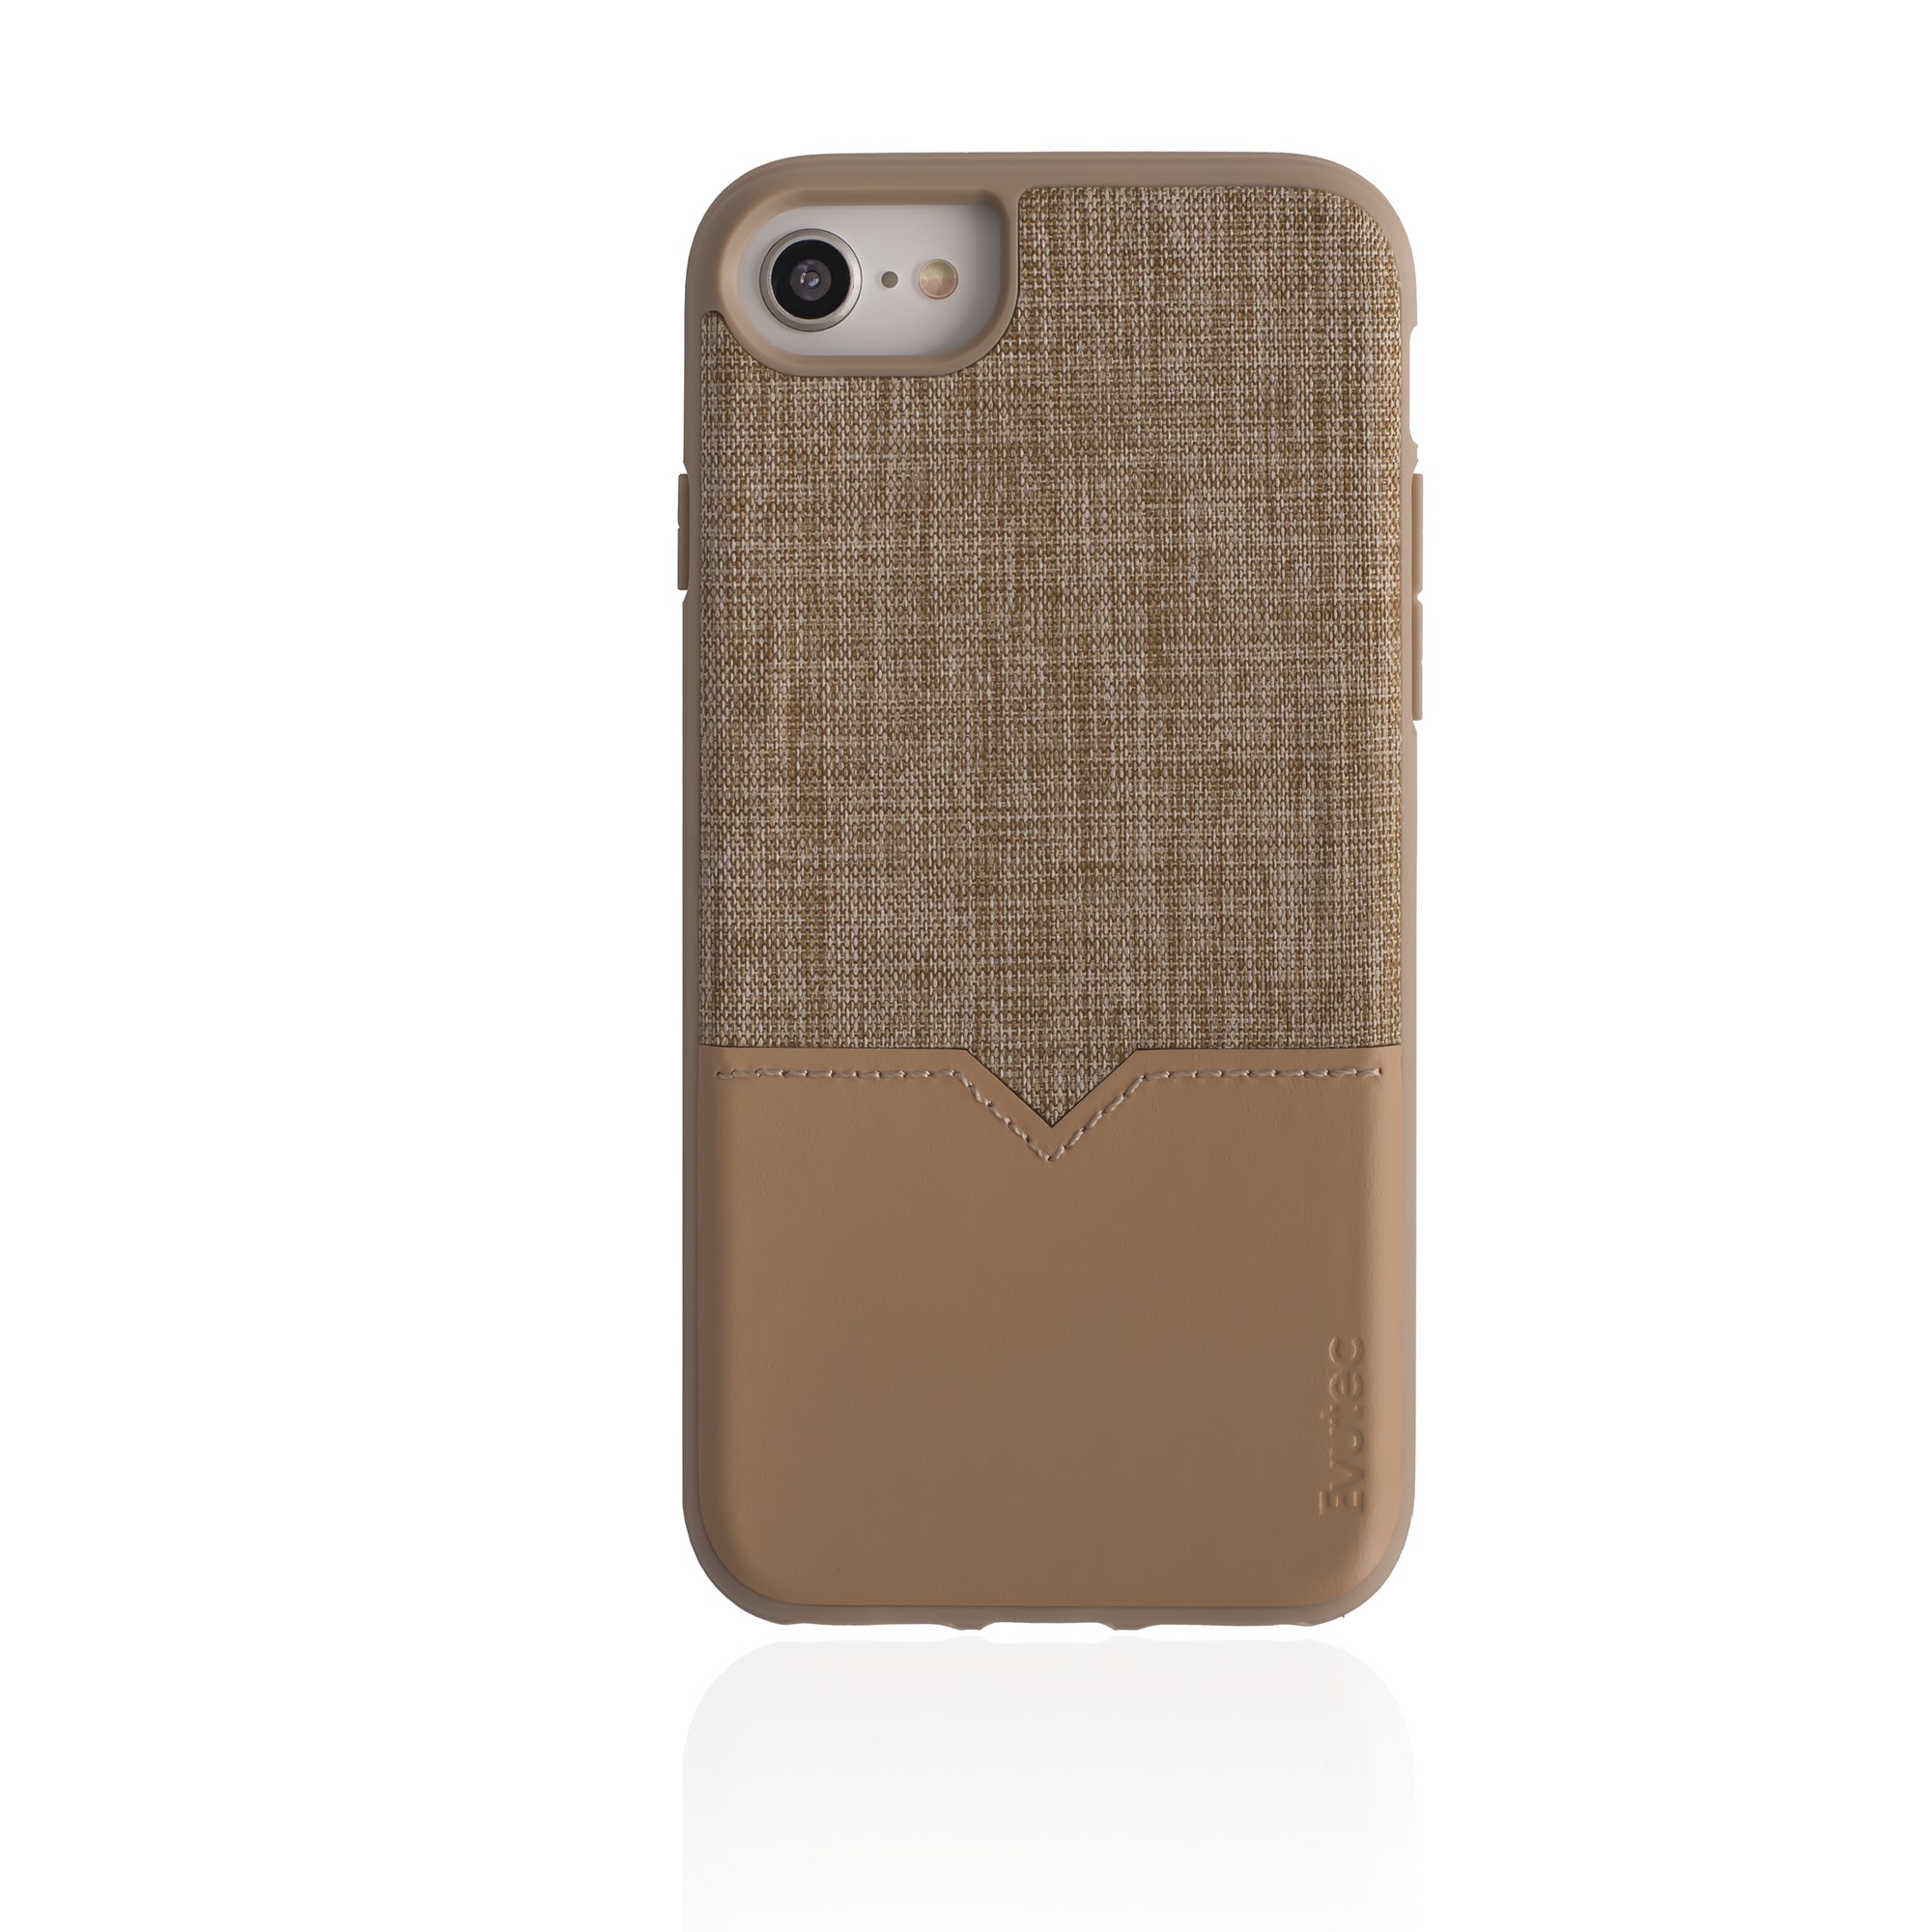 Evutec NH680MTD01 Tan Iphone Case For 6 6S 7 7S & 8 With